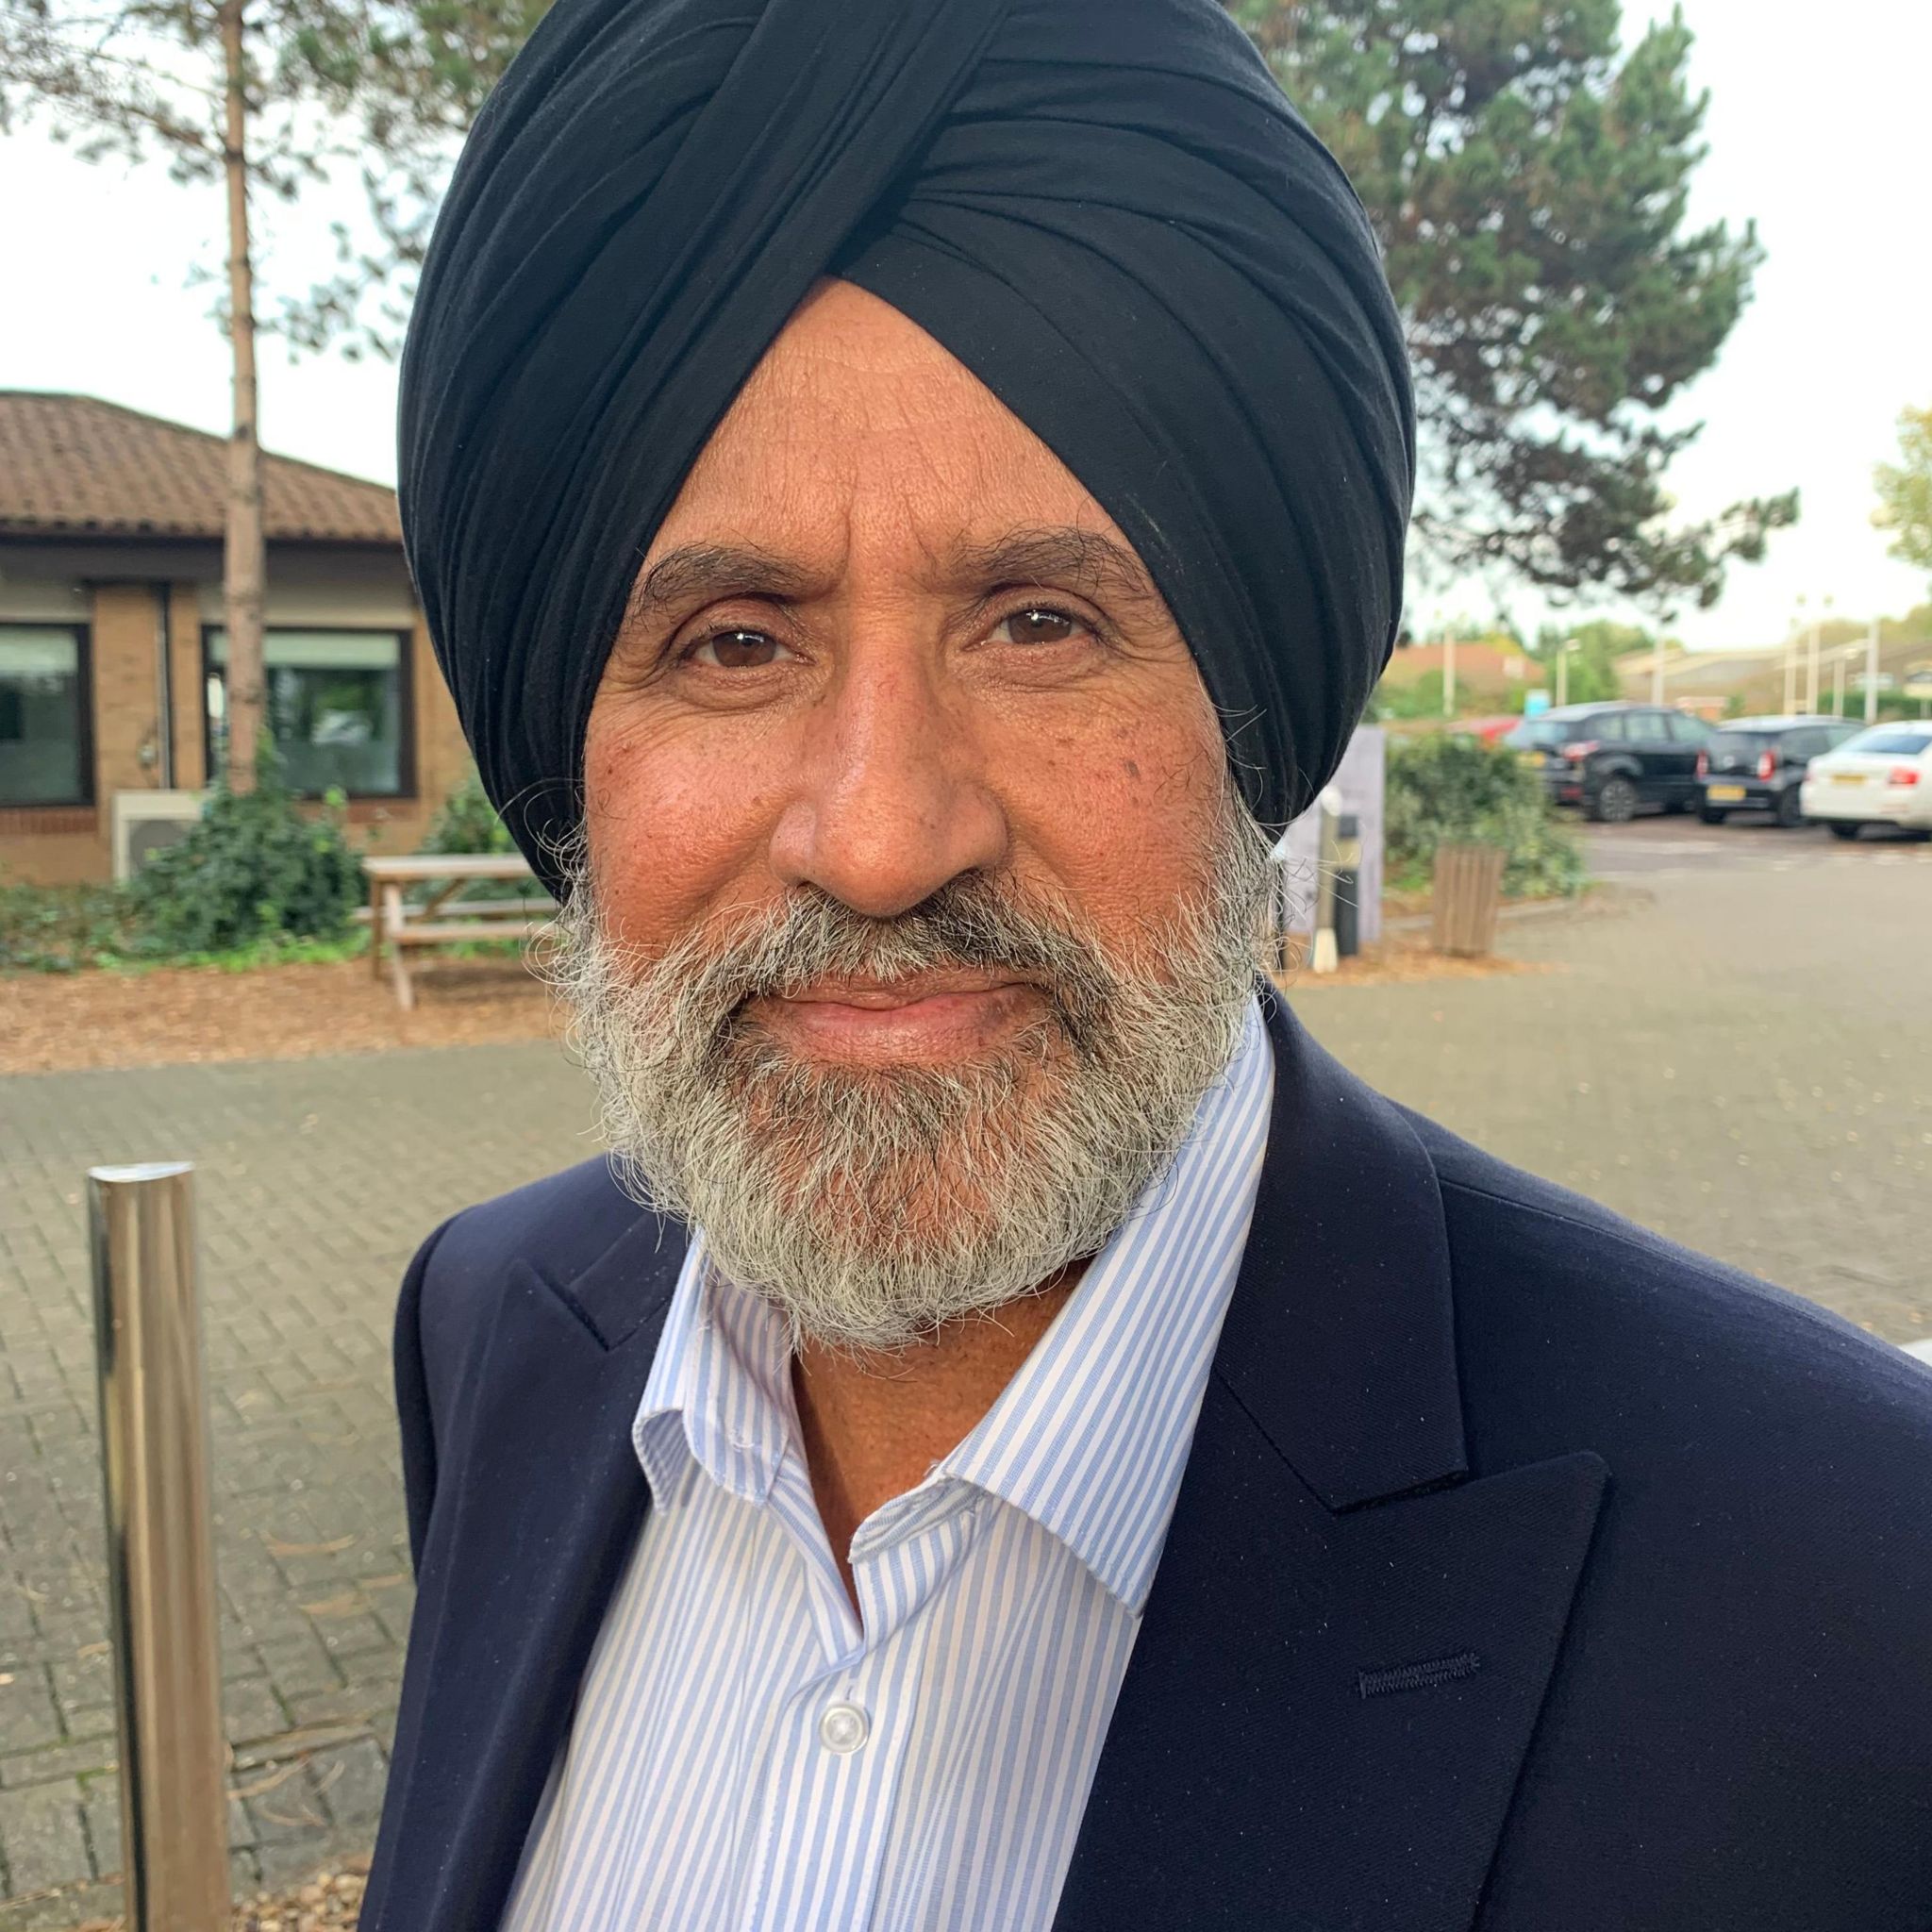 Liberal Democrat Candidate Jasbir Singh Parmar with a blue jacket and a white striped shirt